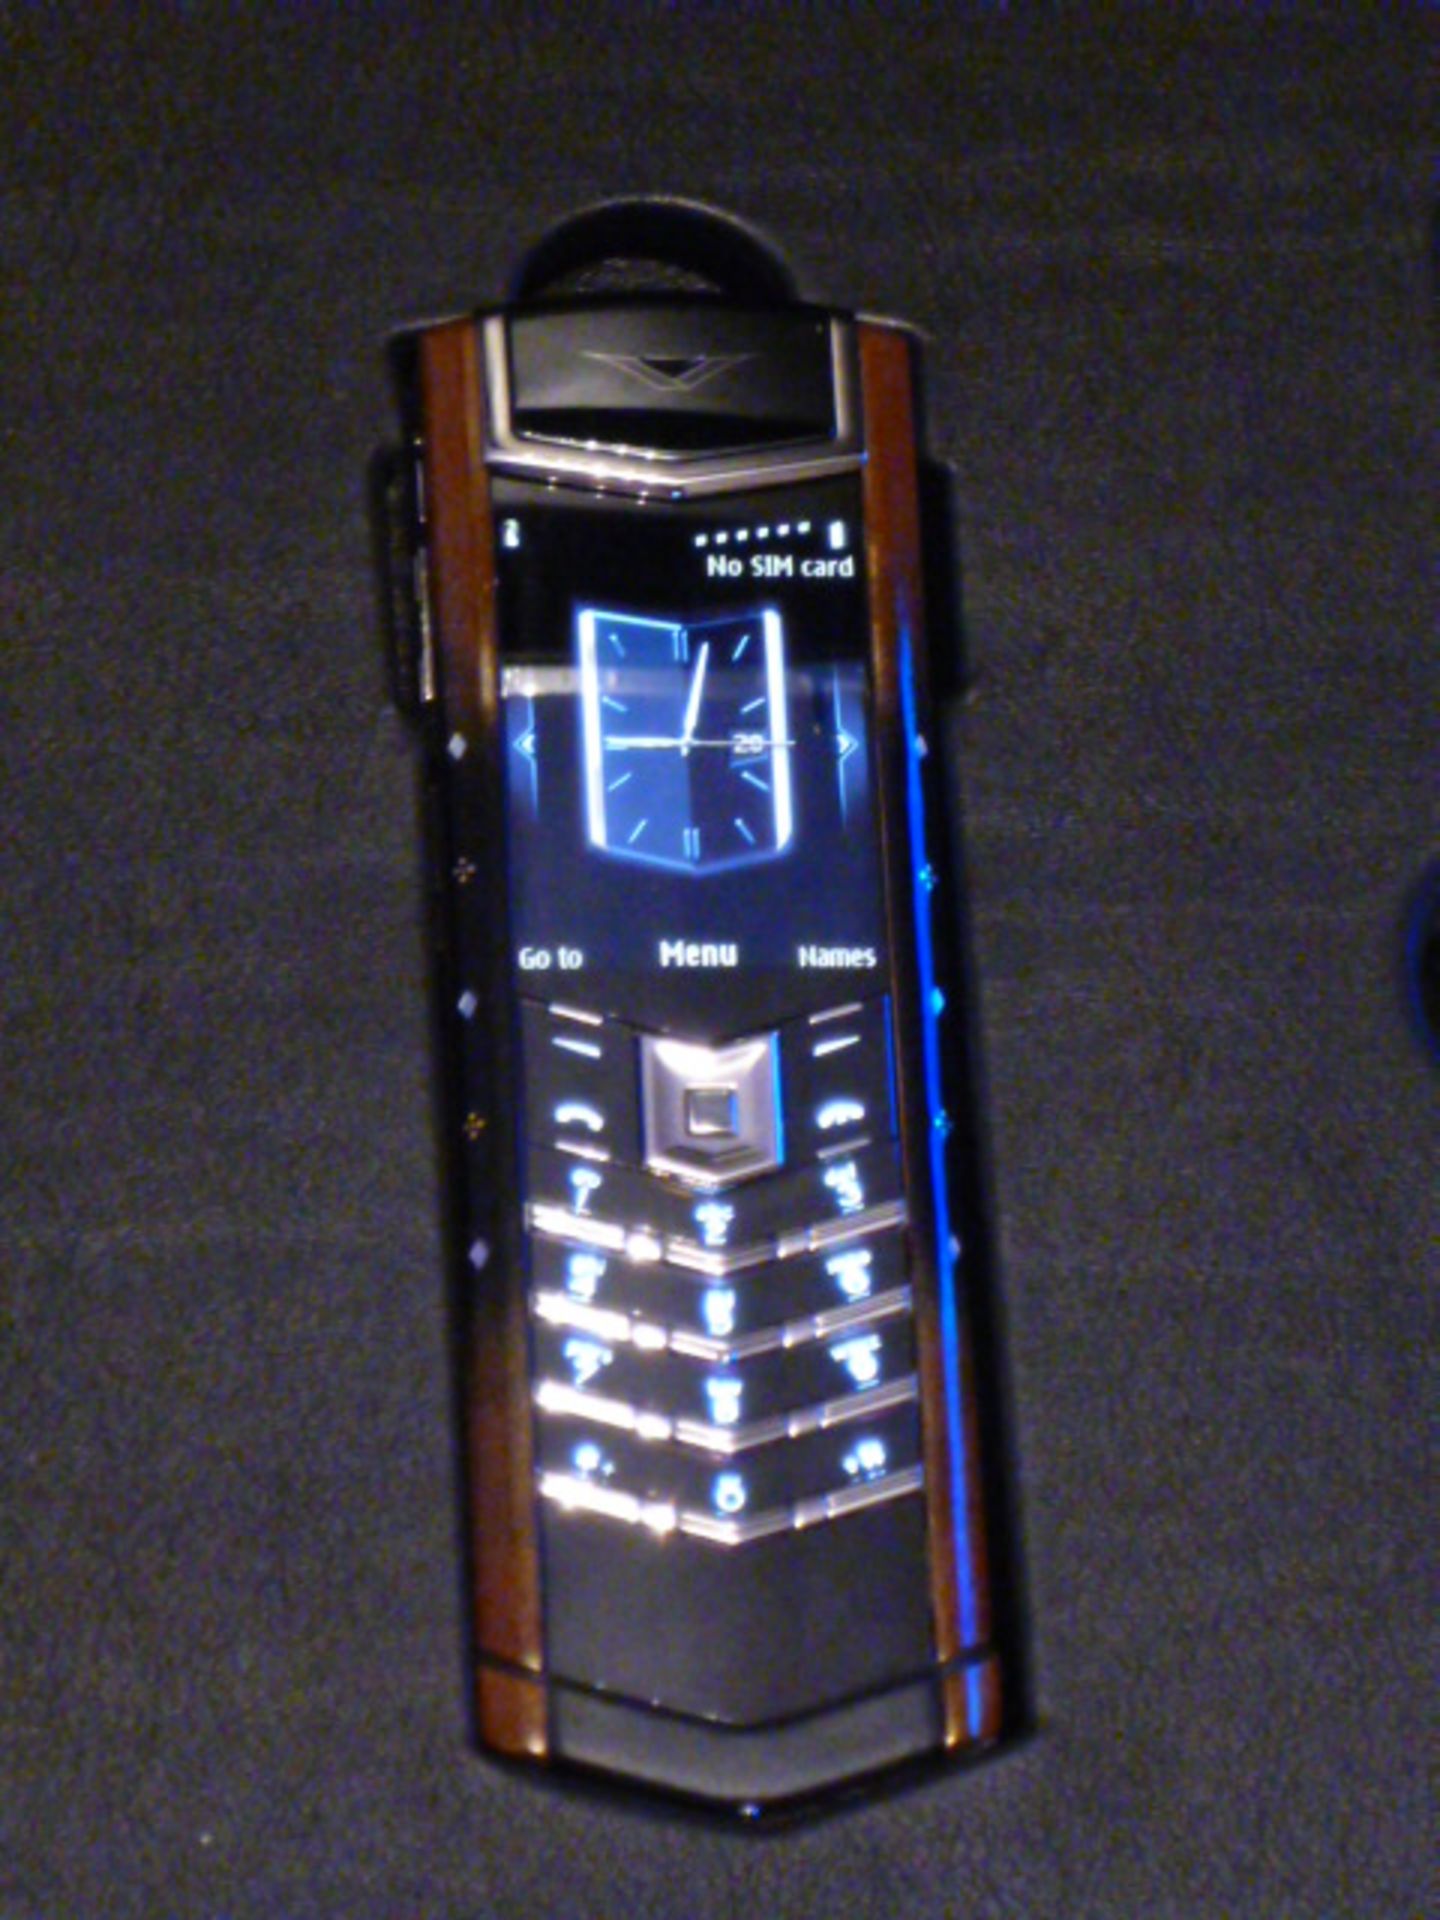 Vertu Signature Harmony Phone, Unique Design 1 of 4. This Handset has been Designed and Created - Image 2 of 6